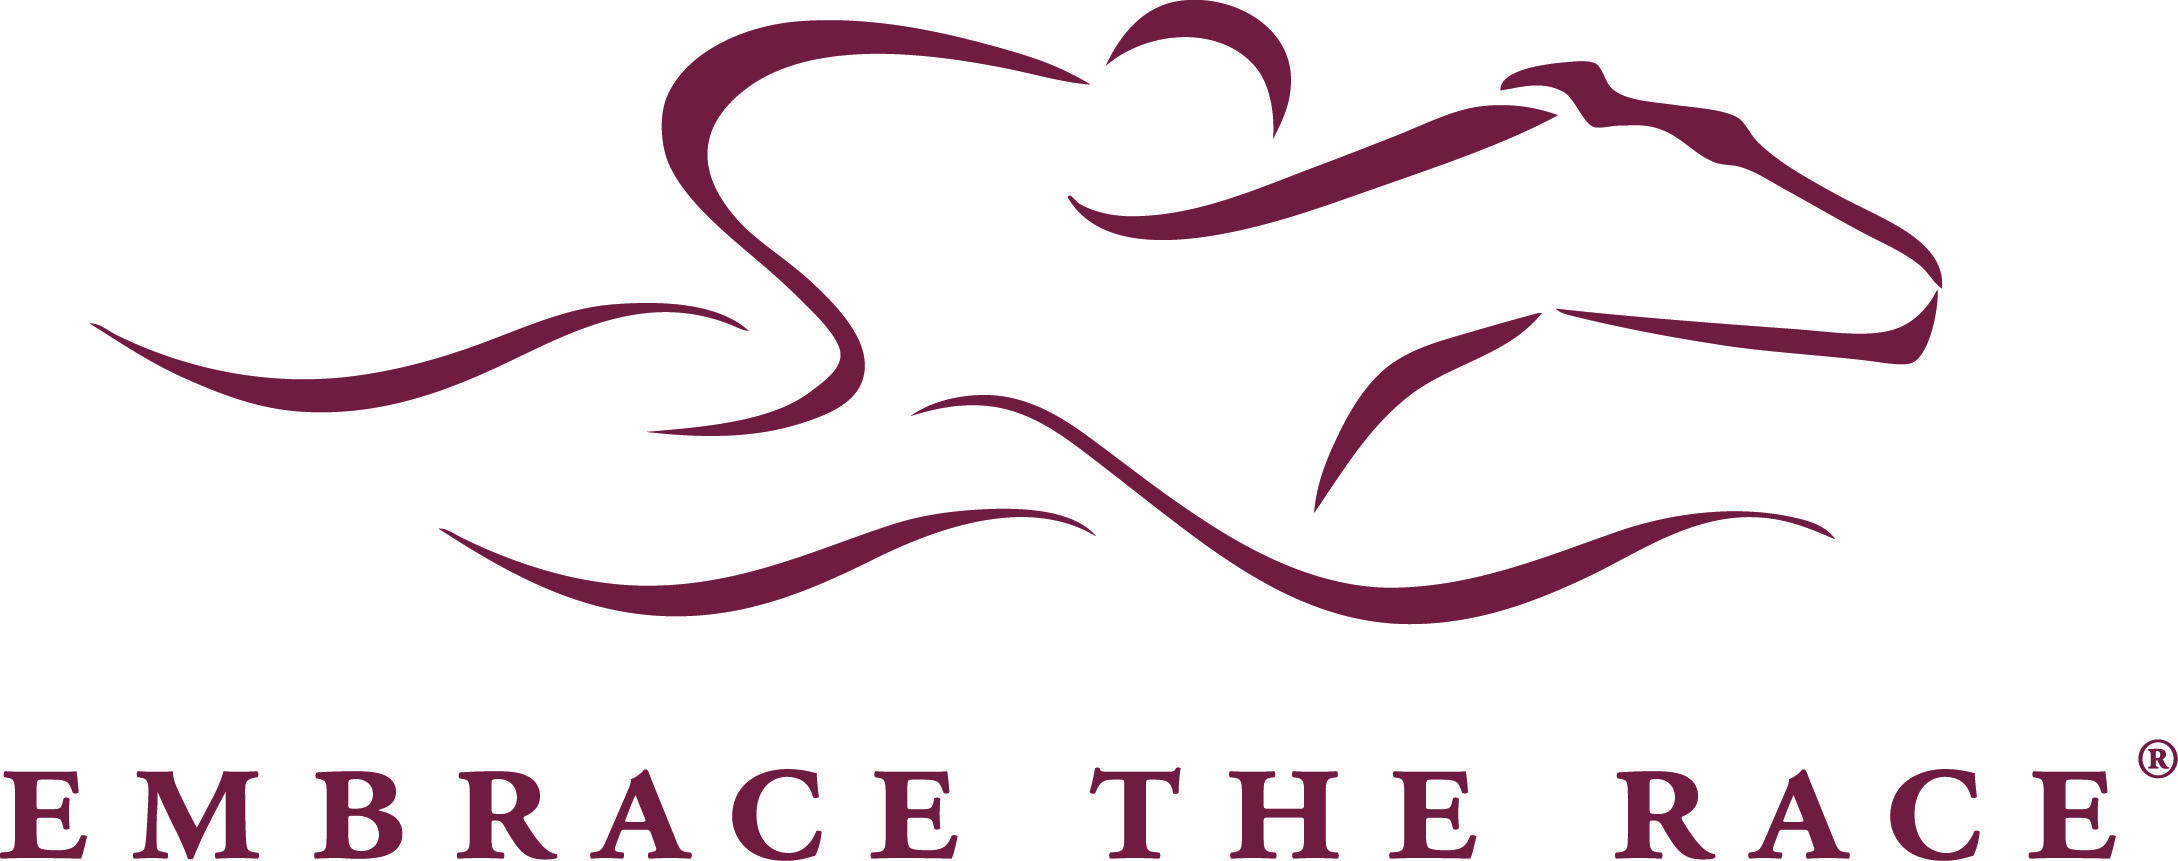 Racehorse Logo - EMBRACE THE RACE Presents Horse Racing Gifts for the Holidays